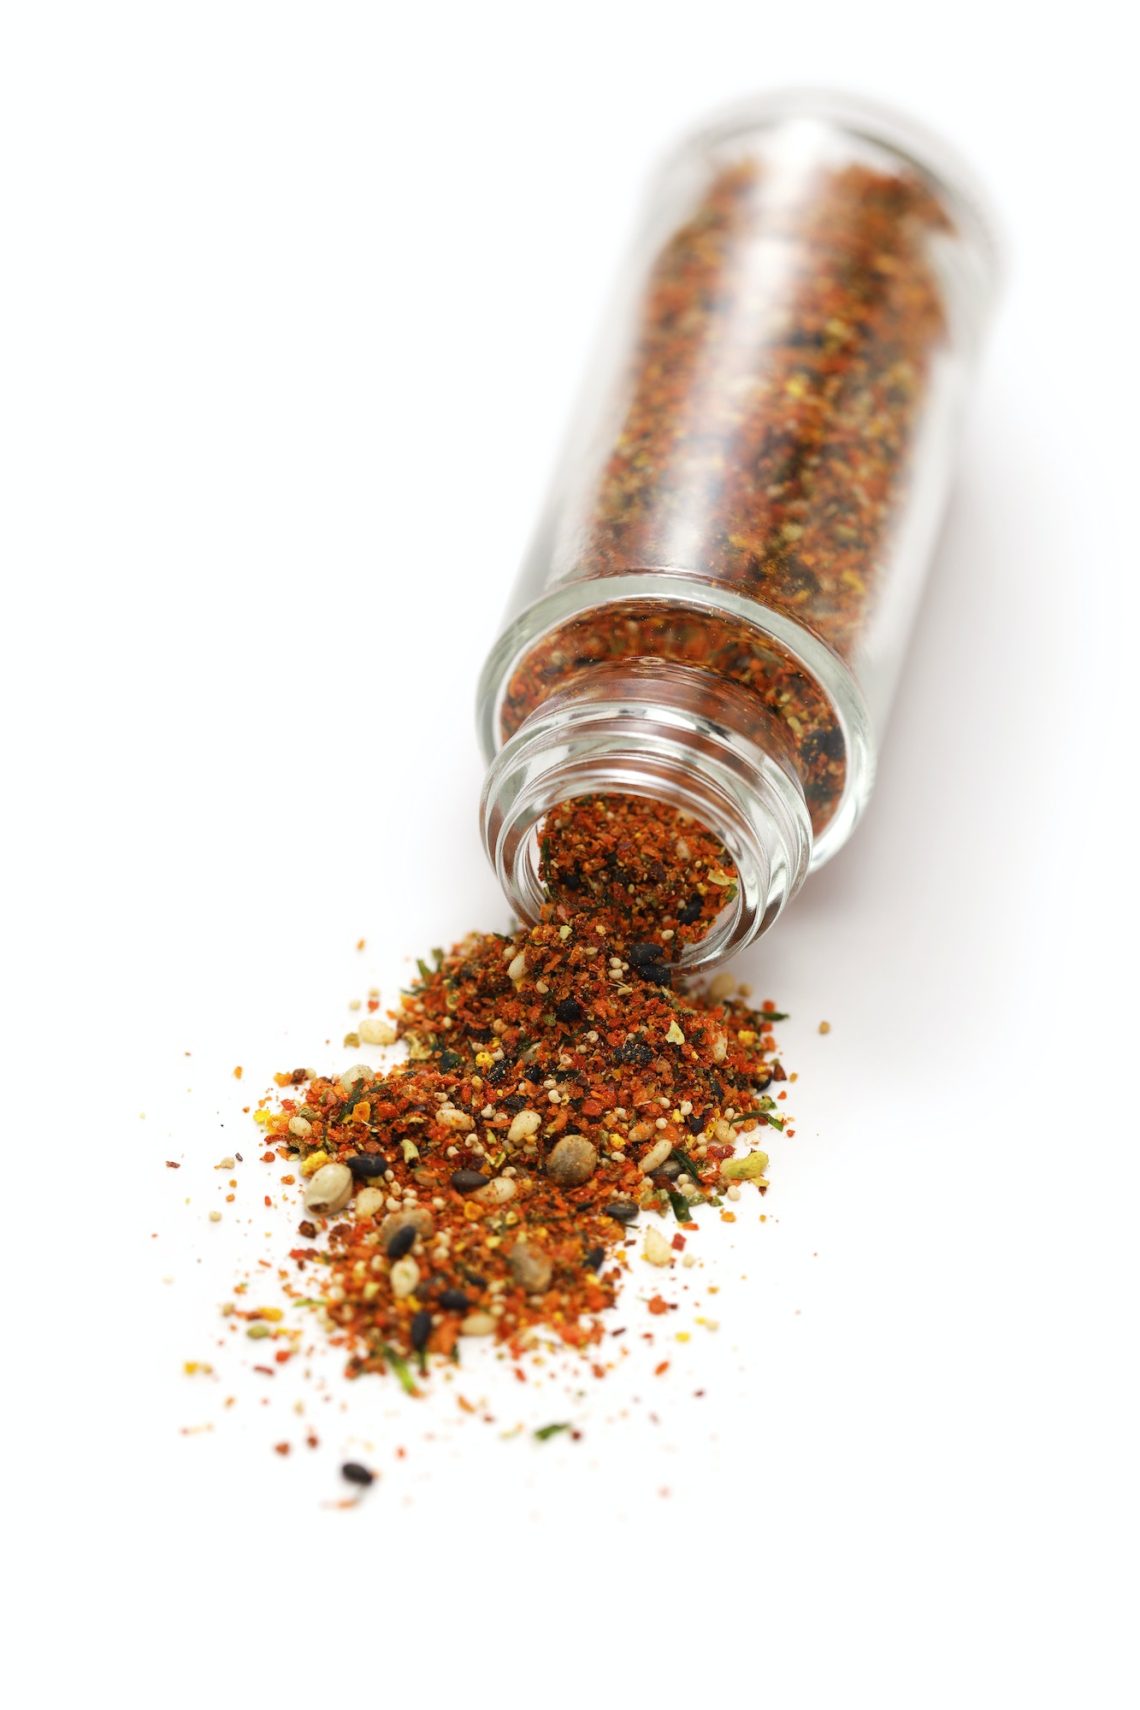 Shichimi Togarashi, a Japanese aromatic spices of dried chili pepper and other seasonings.